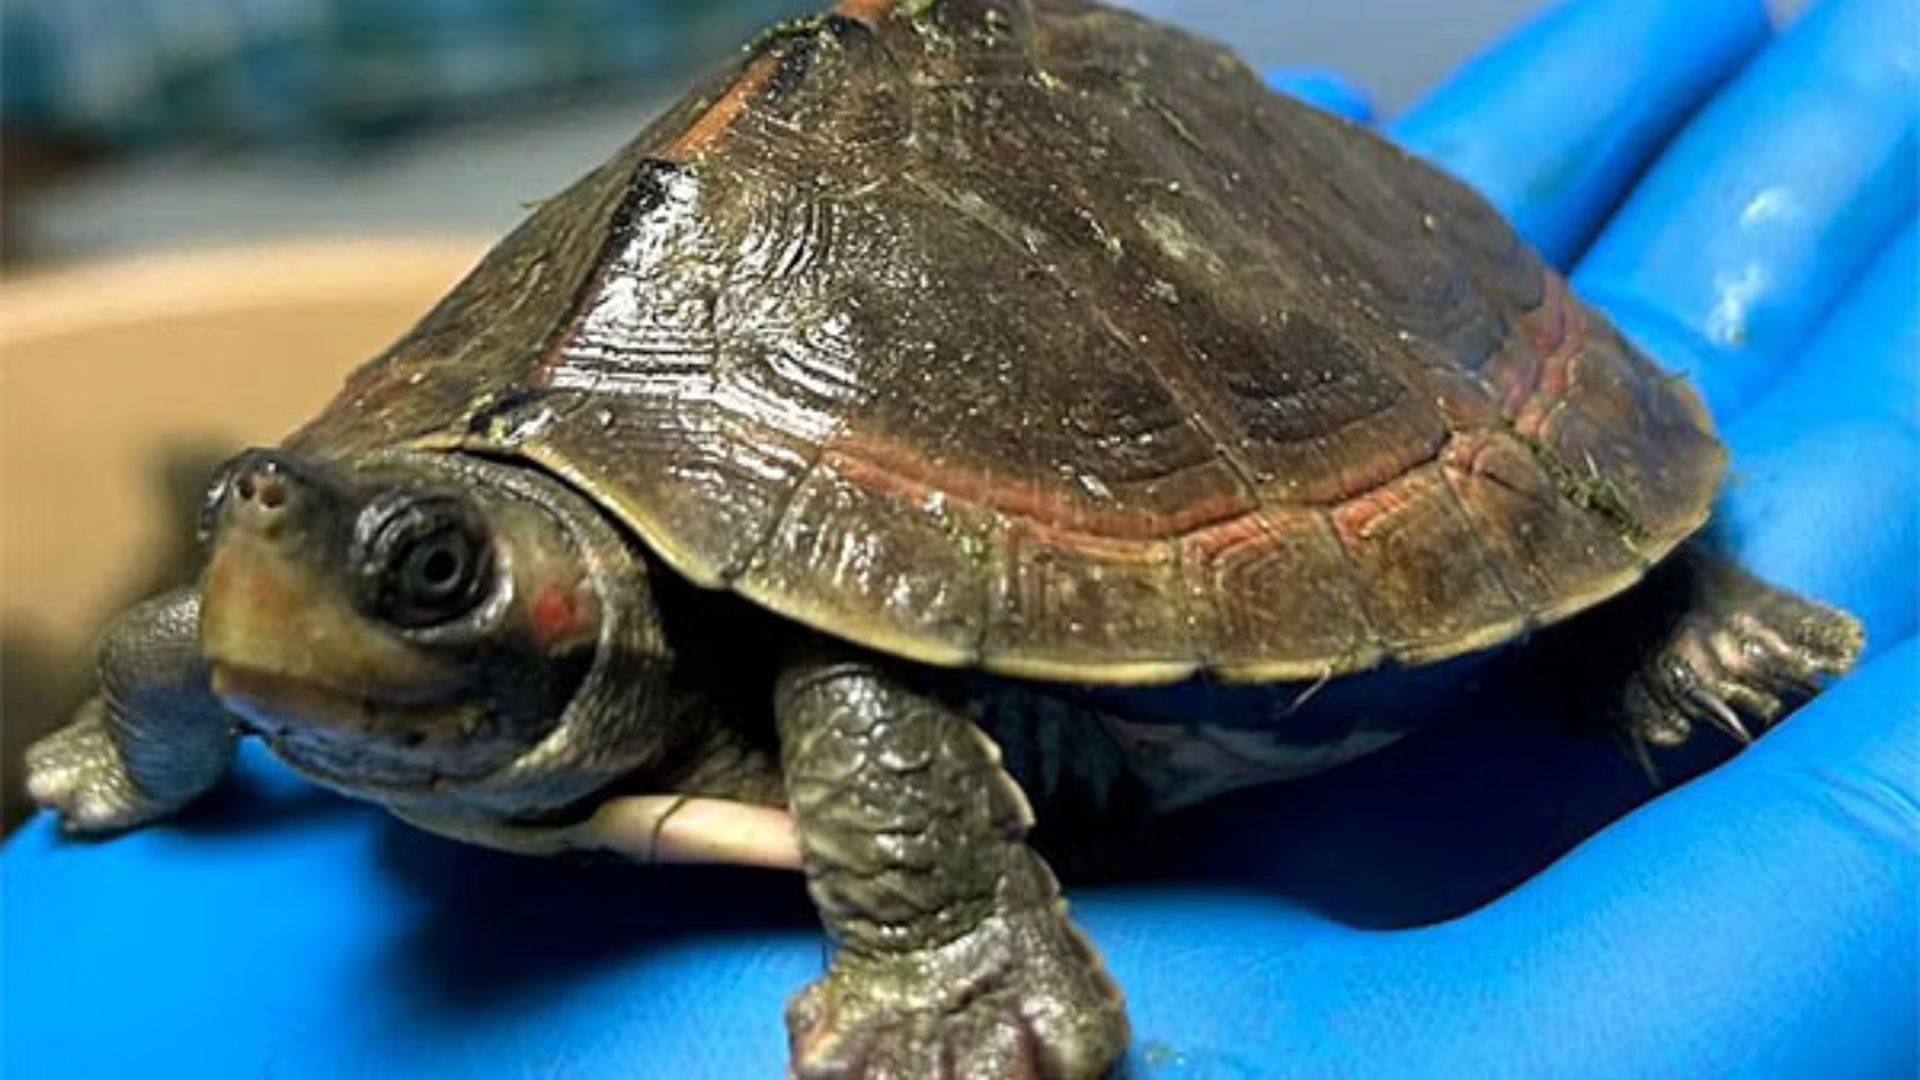 Hundreds of turtles killed by electrocution in Chiniot, Pakistan